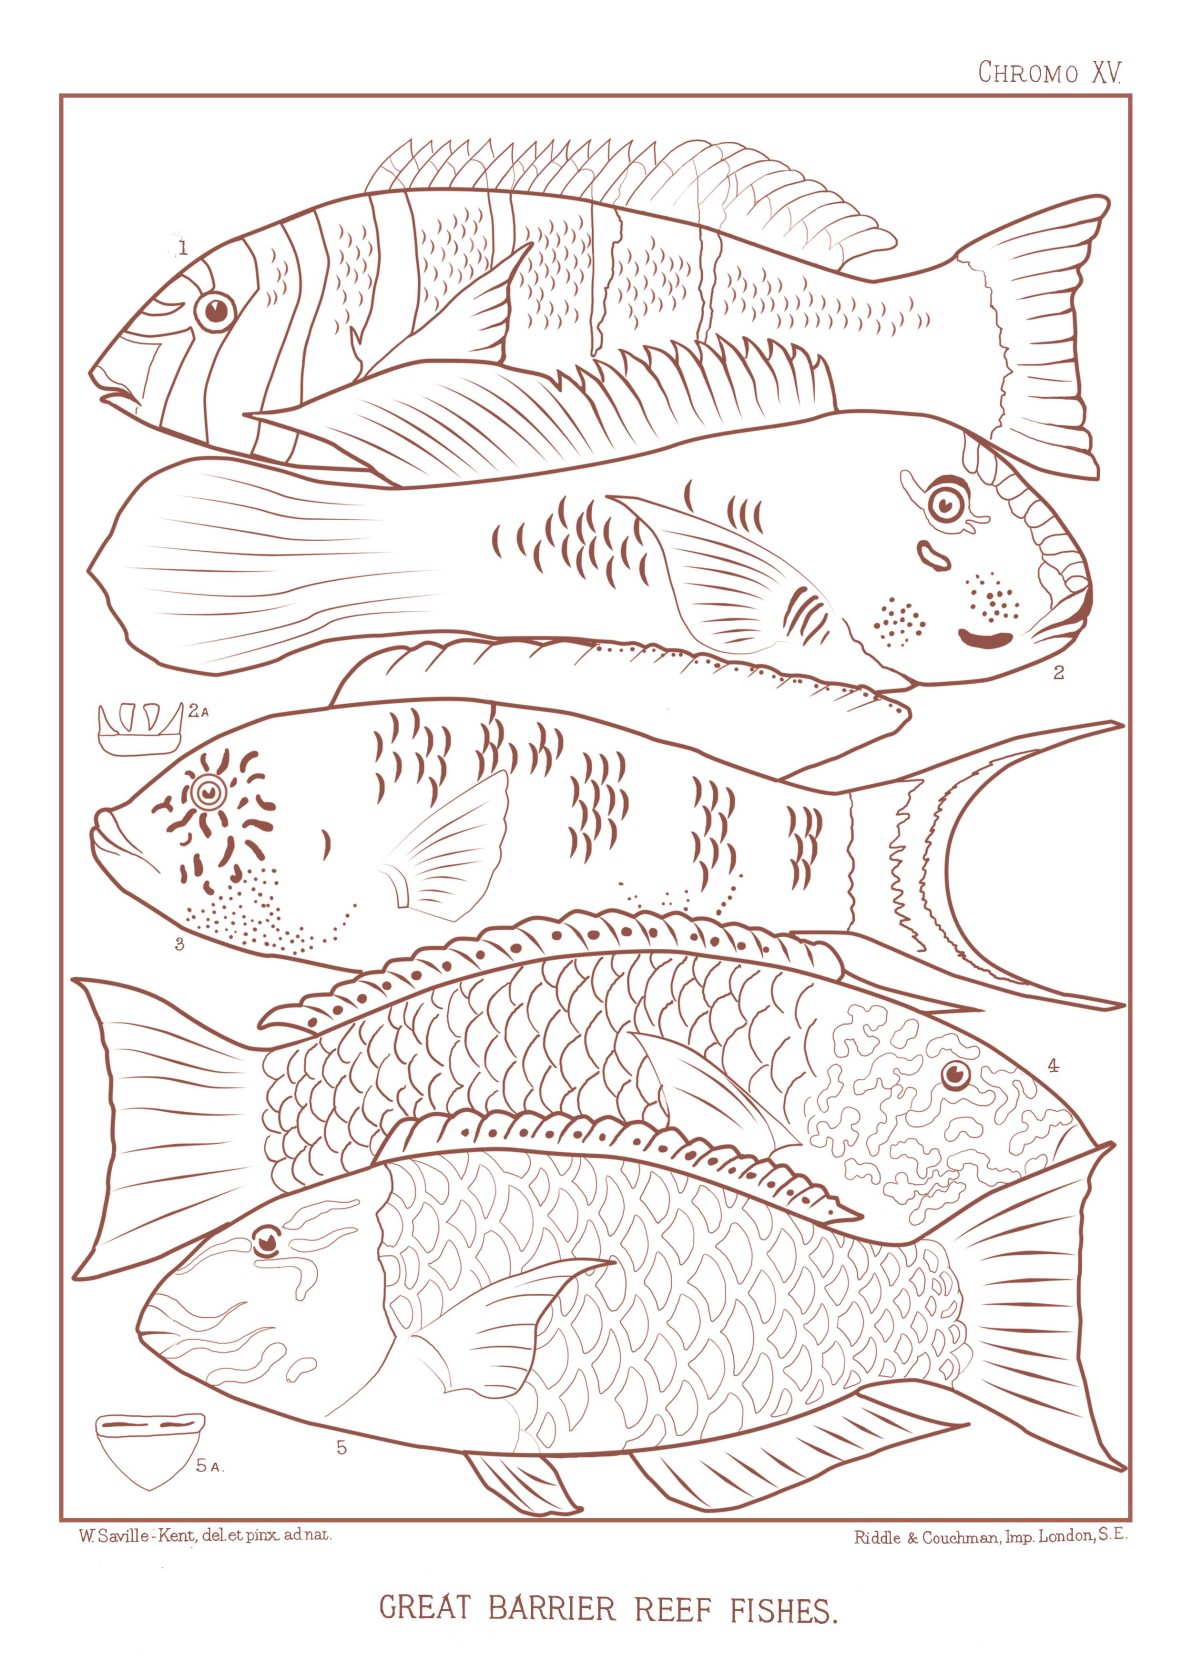 Drawing of 5 Great Barrier Reef fish